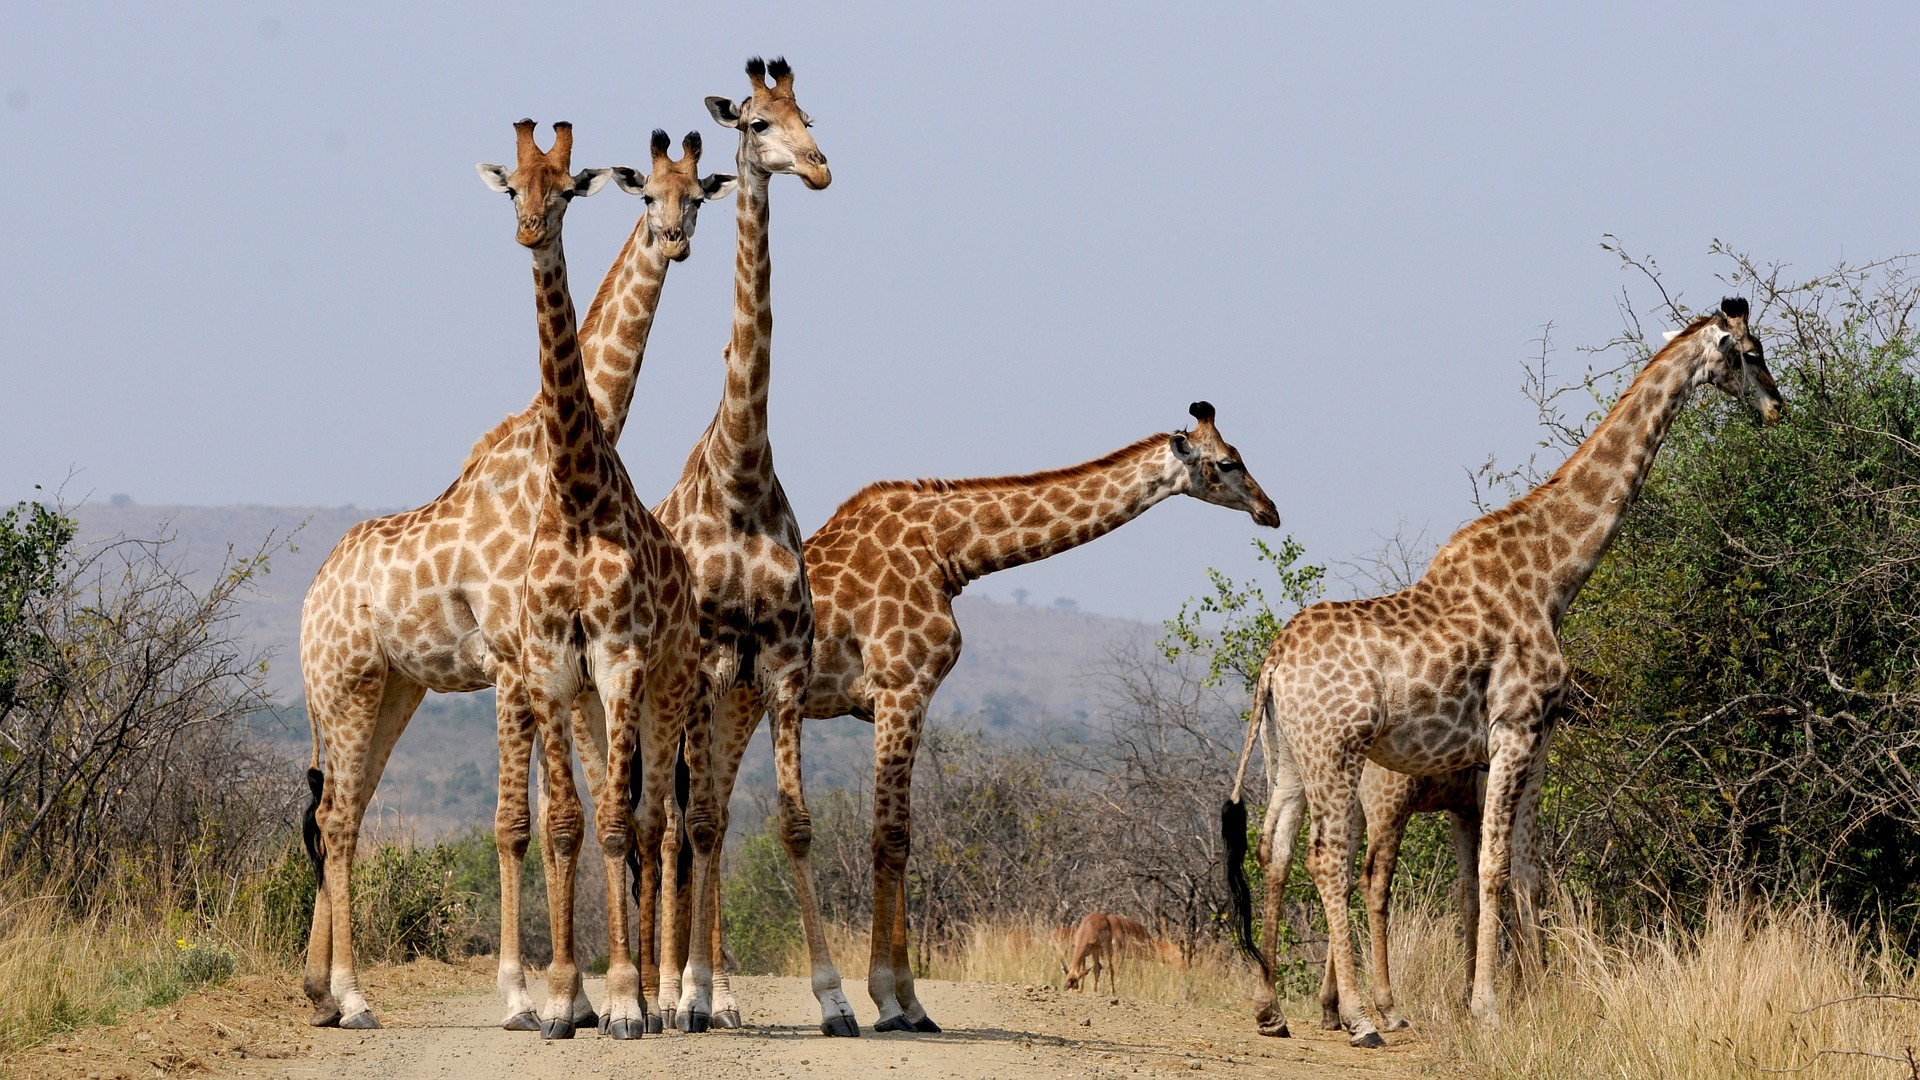 South Africa giraffes spotted on safari.